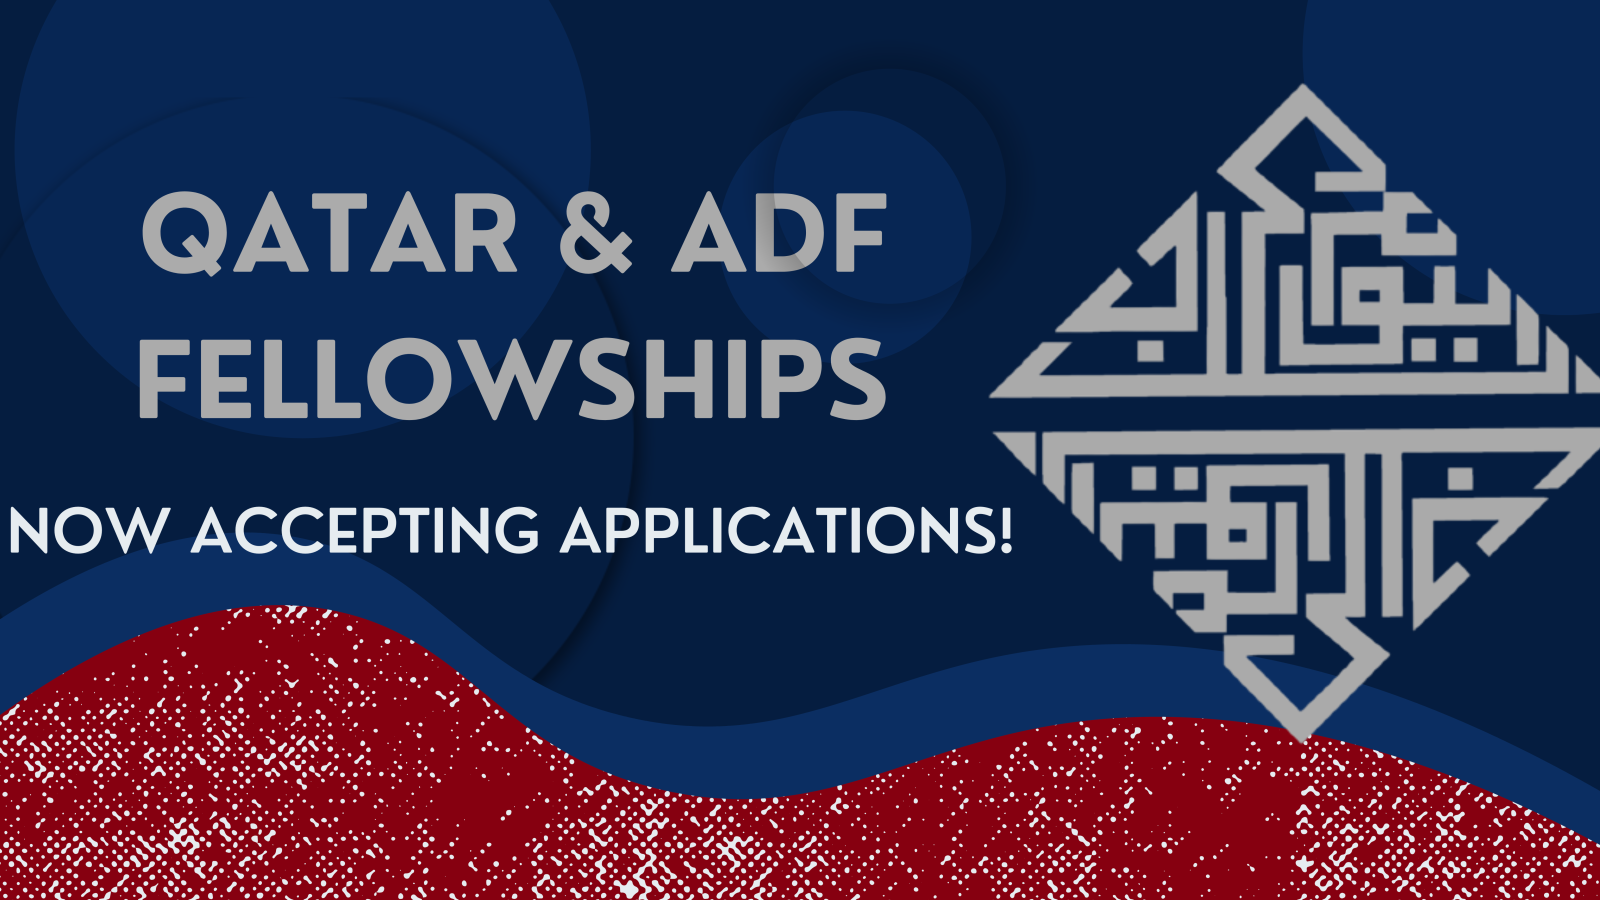 Banner for ADF and Qatar Fellowships